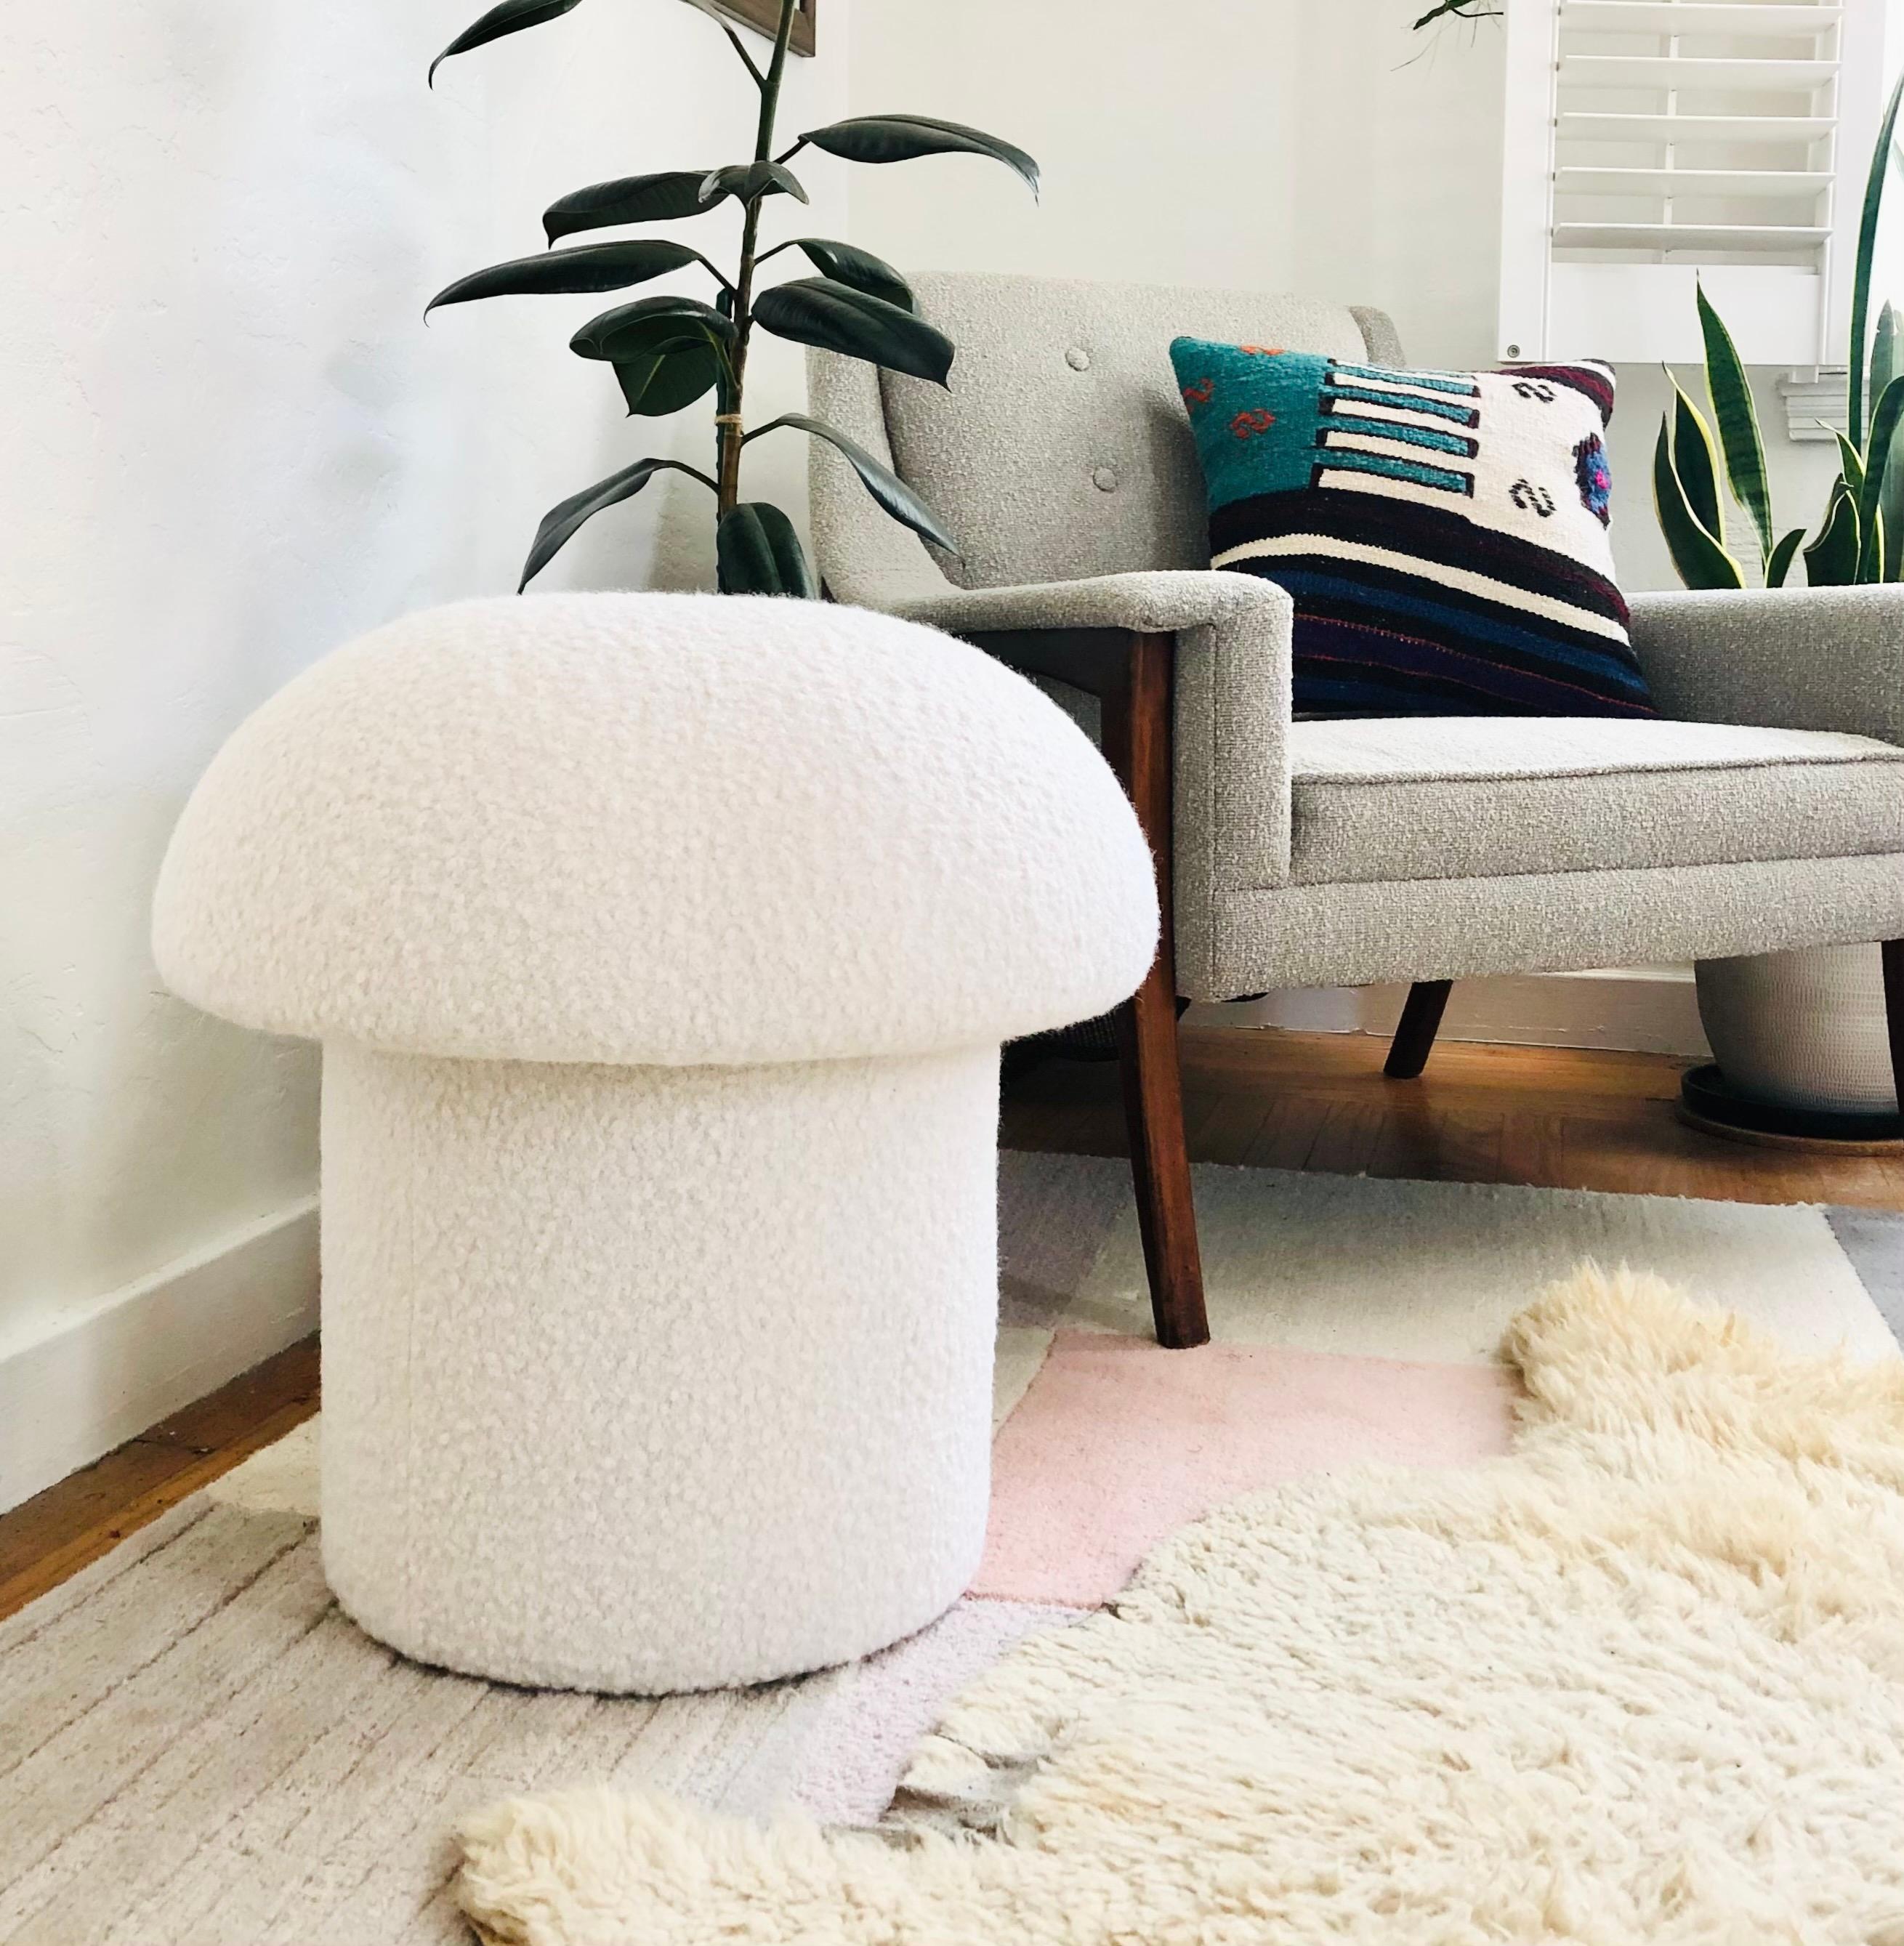 A handmade mushroom shaped stool, upholstered in a white colored curly boucle fabric. Perfect for using as a footstool or extra occasional seating. A comfortable cushioned seat and sculptural accent piece.